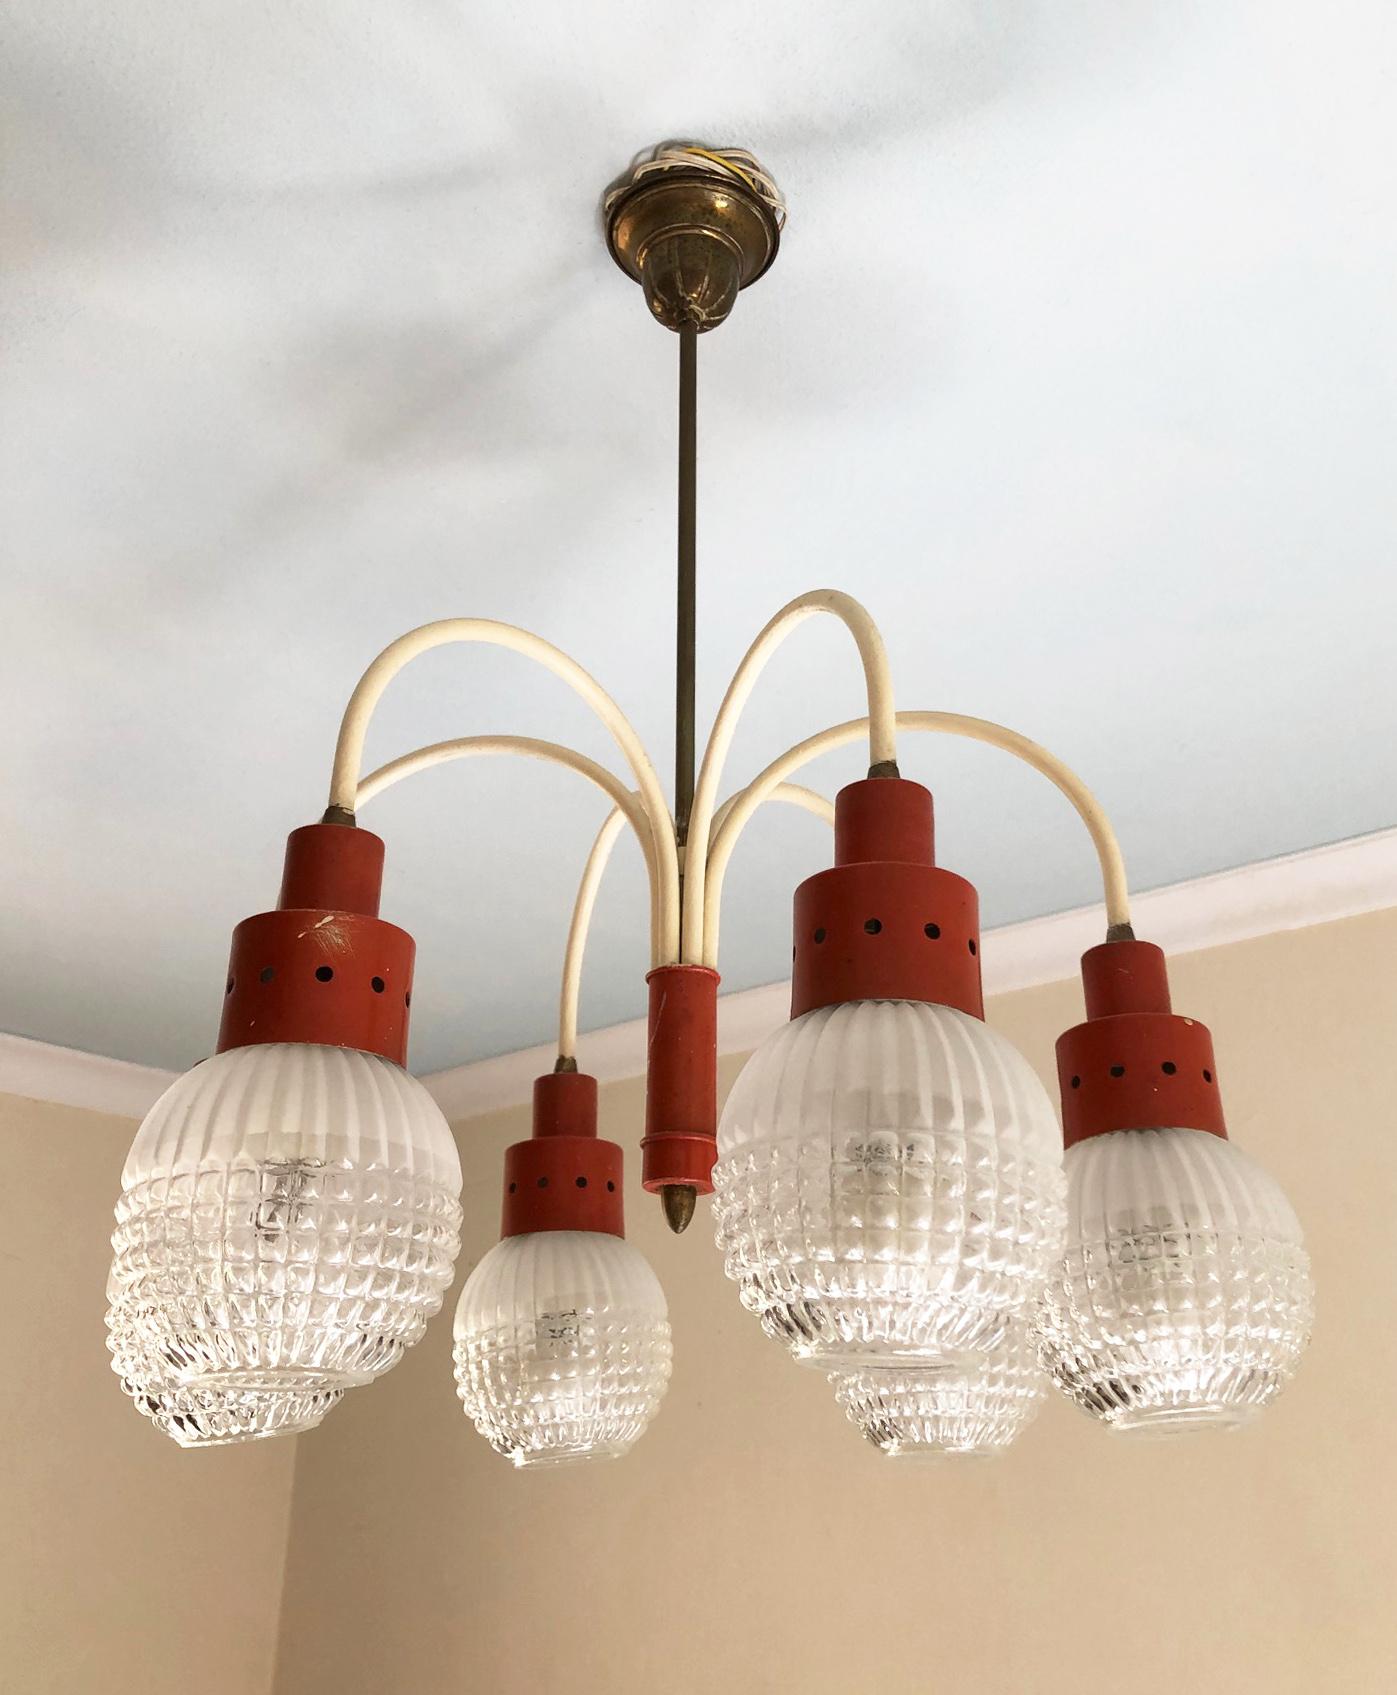 Original Italian chandelier from 1970s with six lights, orange and cream color
In working condition.
Equipped with original 20th century European wiring.
We recommend buyer consults an experienced electrician for proper installation.
The fixture